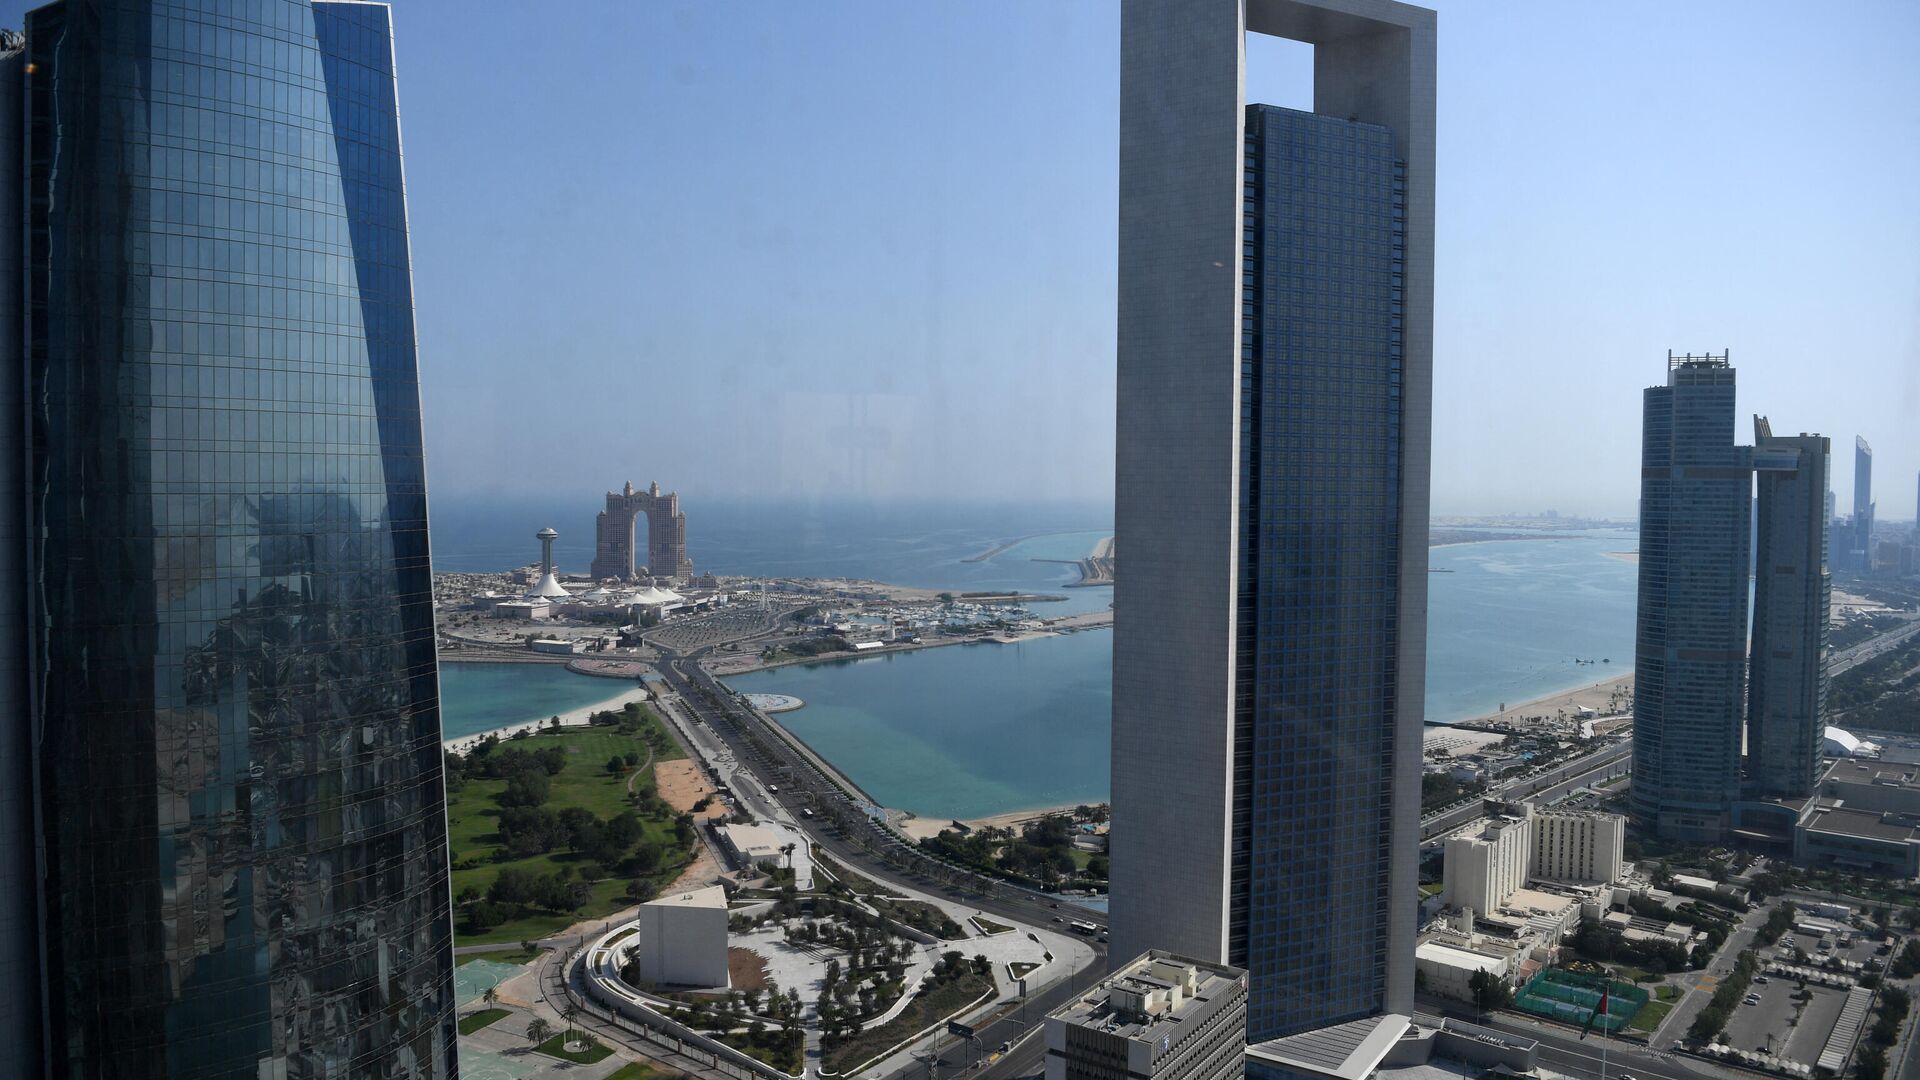 A general view shows the sea front promenade in the Emirati capital Abu Dhabi with the ADNOC headquarters (Abu Dhabi National Oil Company) office complex (C) in the foreground on May 29, 2019. - Sputnik International, 1920, 23.01.2022